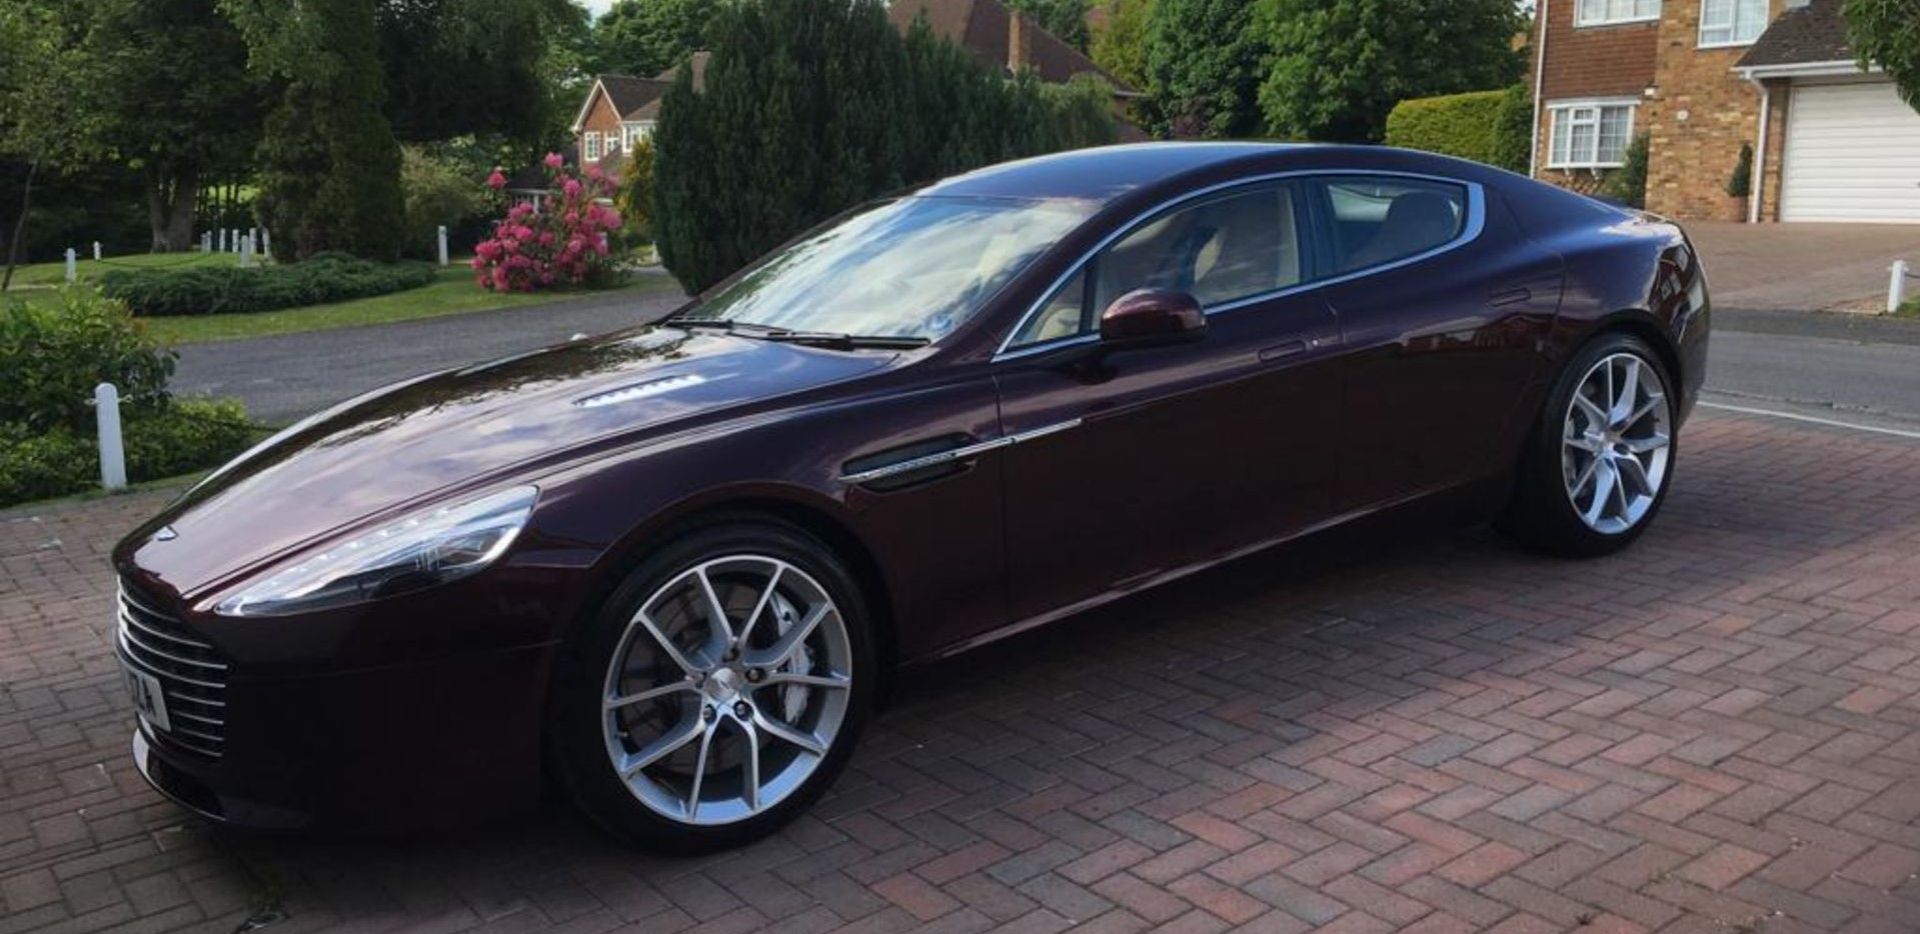 2015 ASTON MARTIN RAPIDE S V12 AUTO RED HATCHBACK, 15400 MILES, SHOWROOM CONDITION - Image 2 of 20